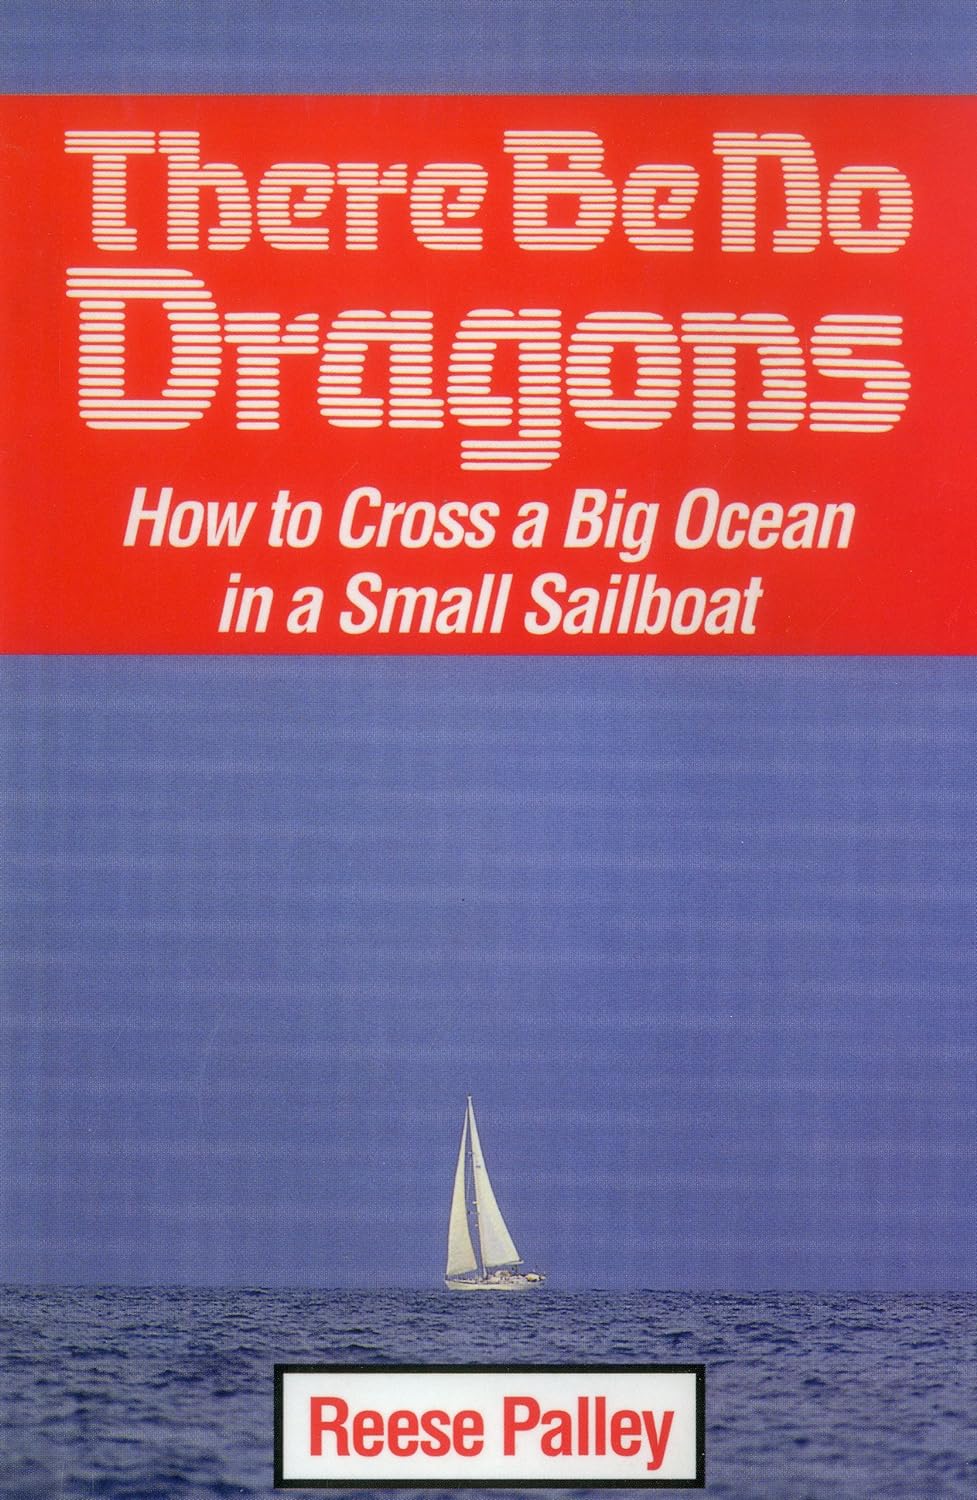 There Be No Dragons: How to Cross a Big Ocean in a Small Sailboat